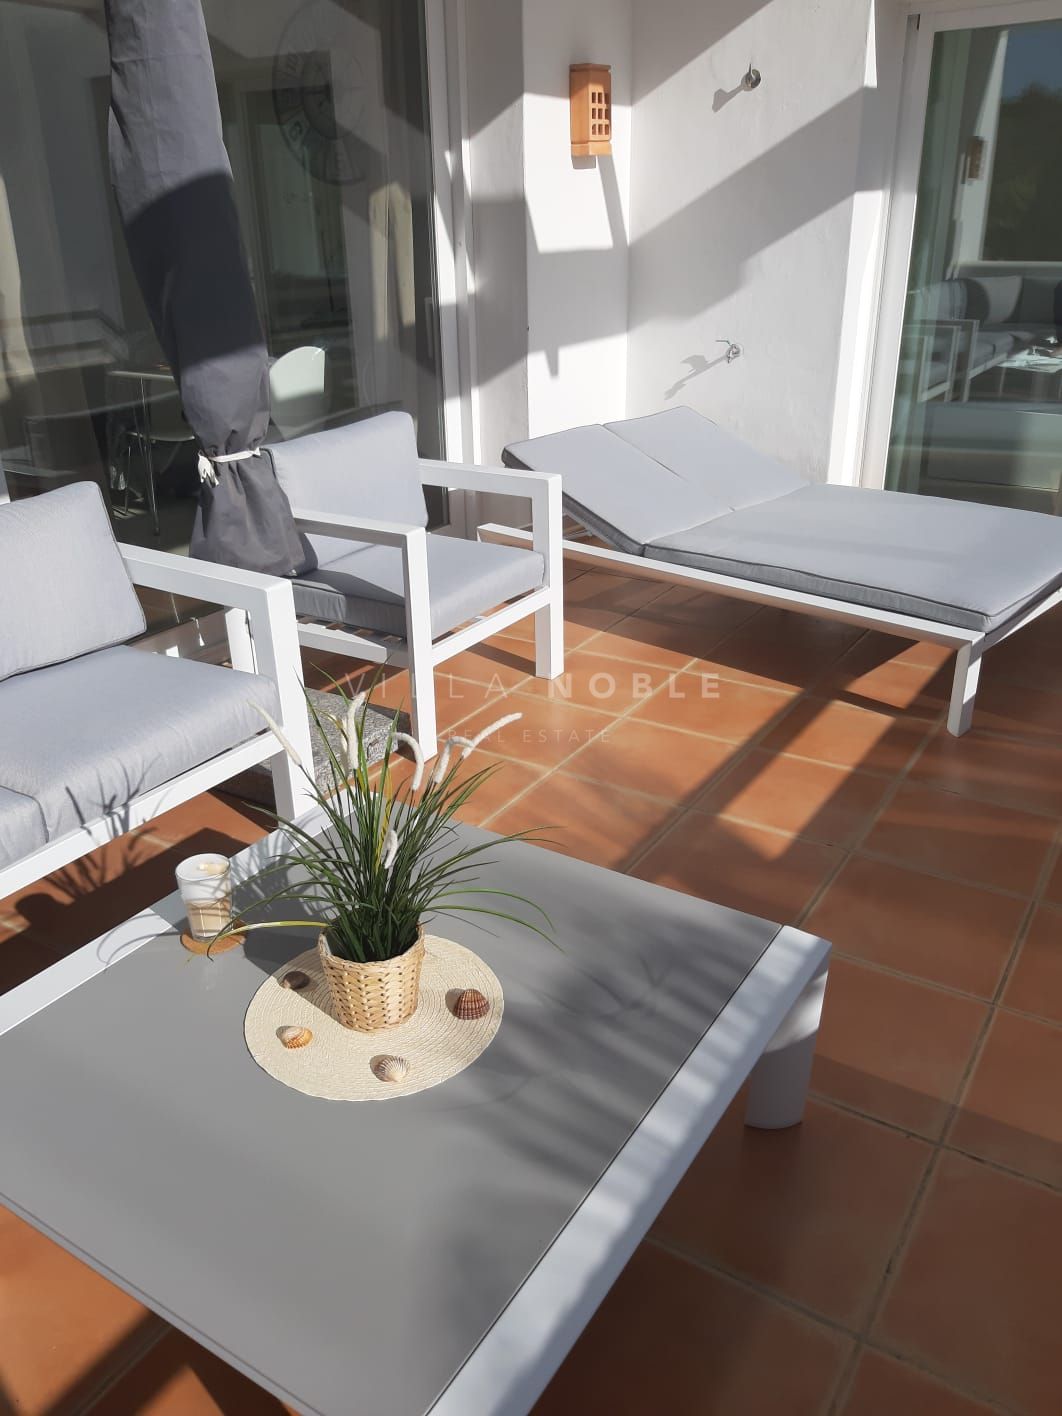 Fantastic furnished apartment in Alcazaba Lagoon Casares